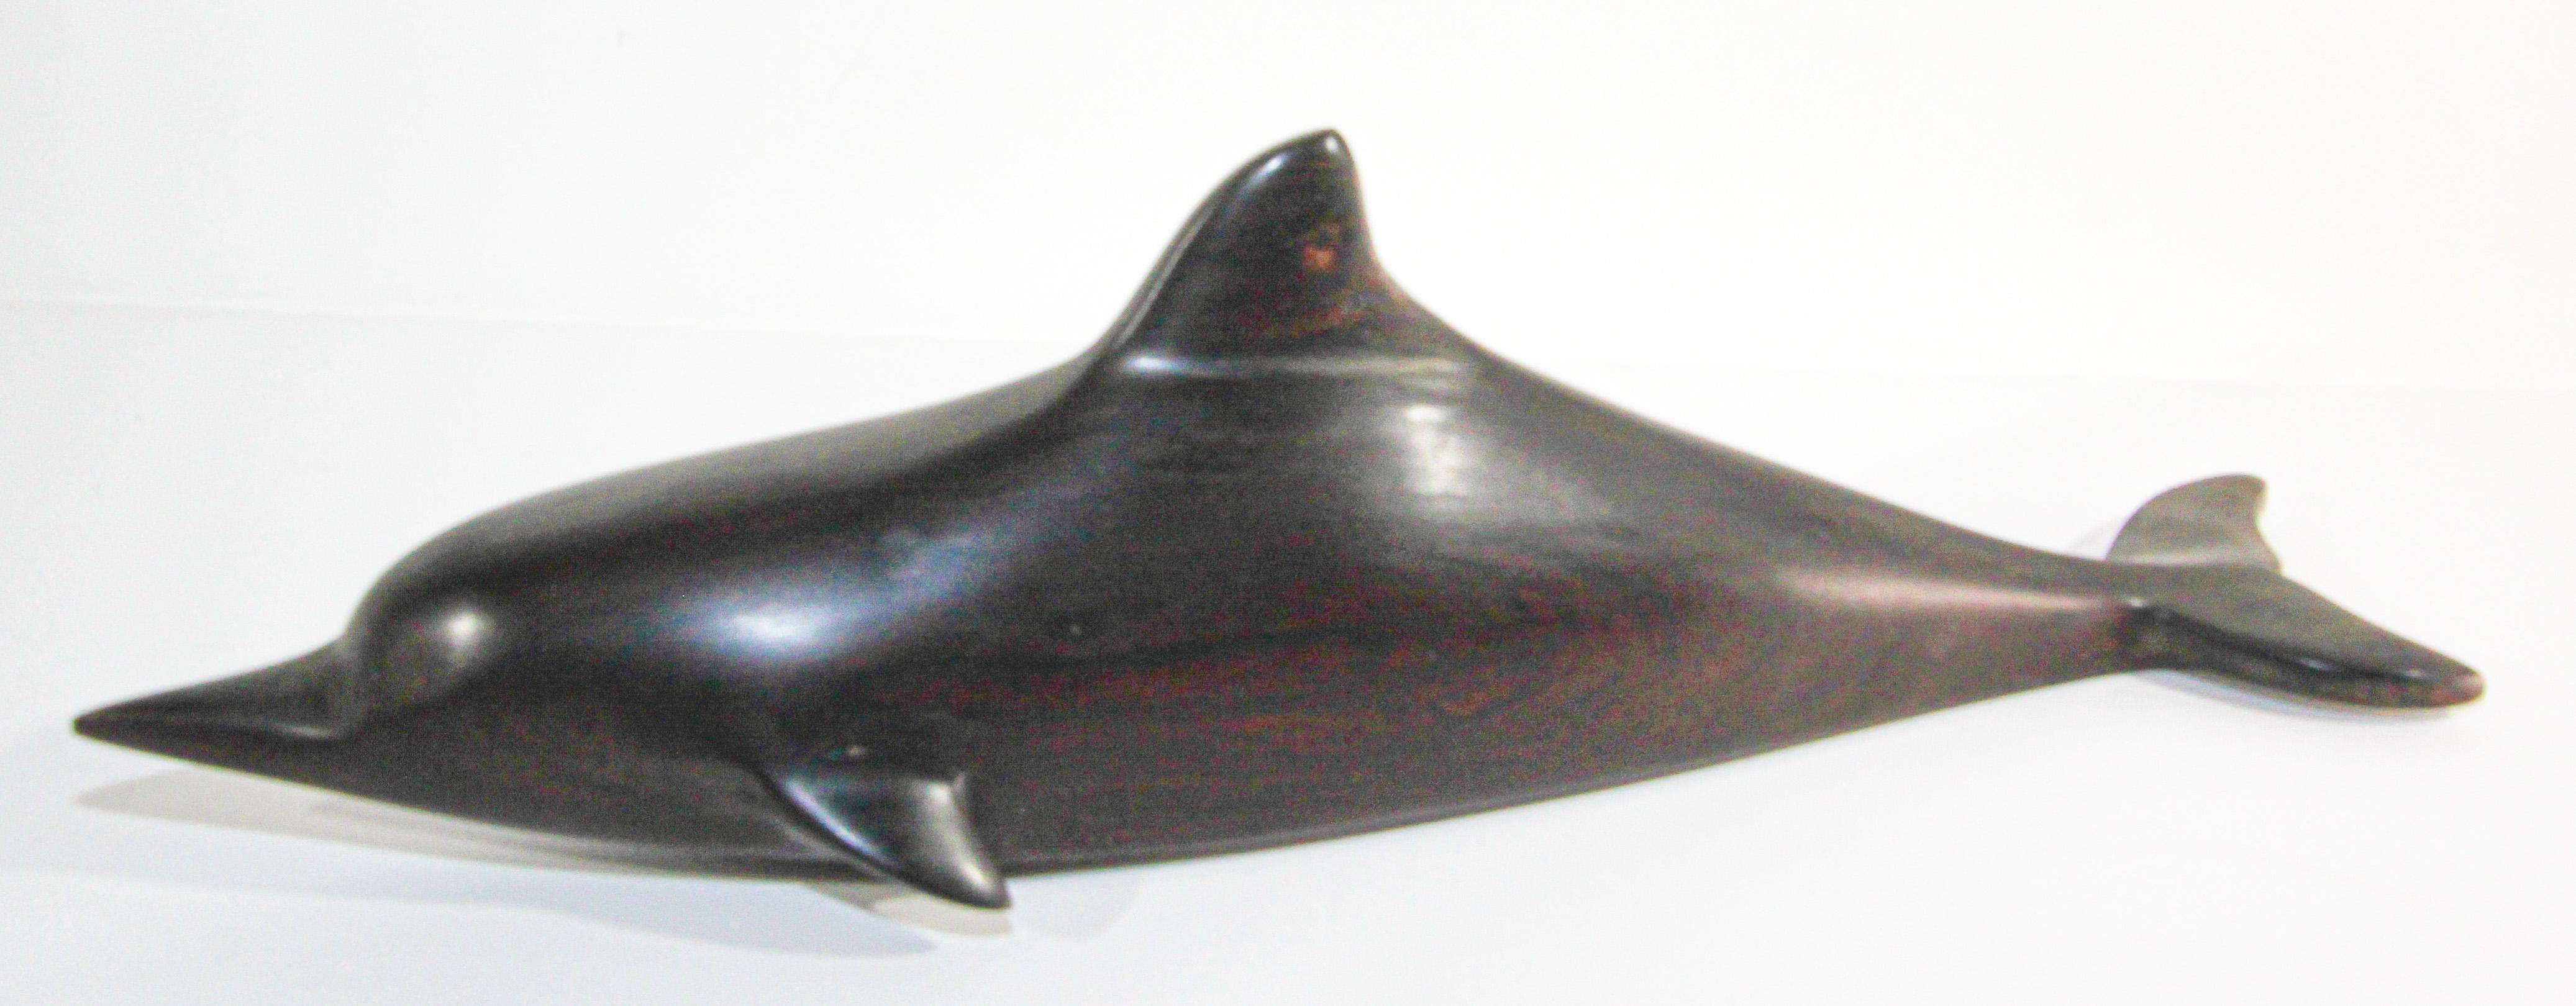 Vintage Brazilian hand carved Ironwood sculpture of a whale and a shark.
Hand carved Brazilian sculpture hand crafted in amazing detail from one of earth's hardest natural ironwood. 
These are authentic art pieces crafted of Brazilian ironwood.